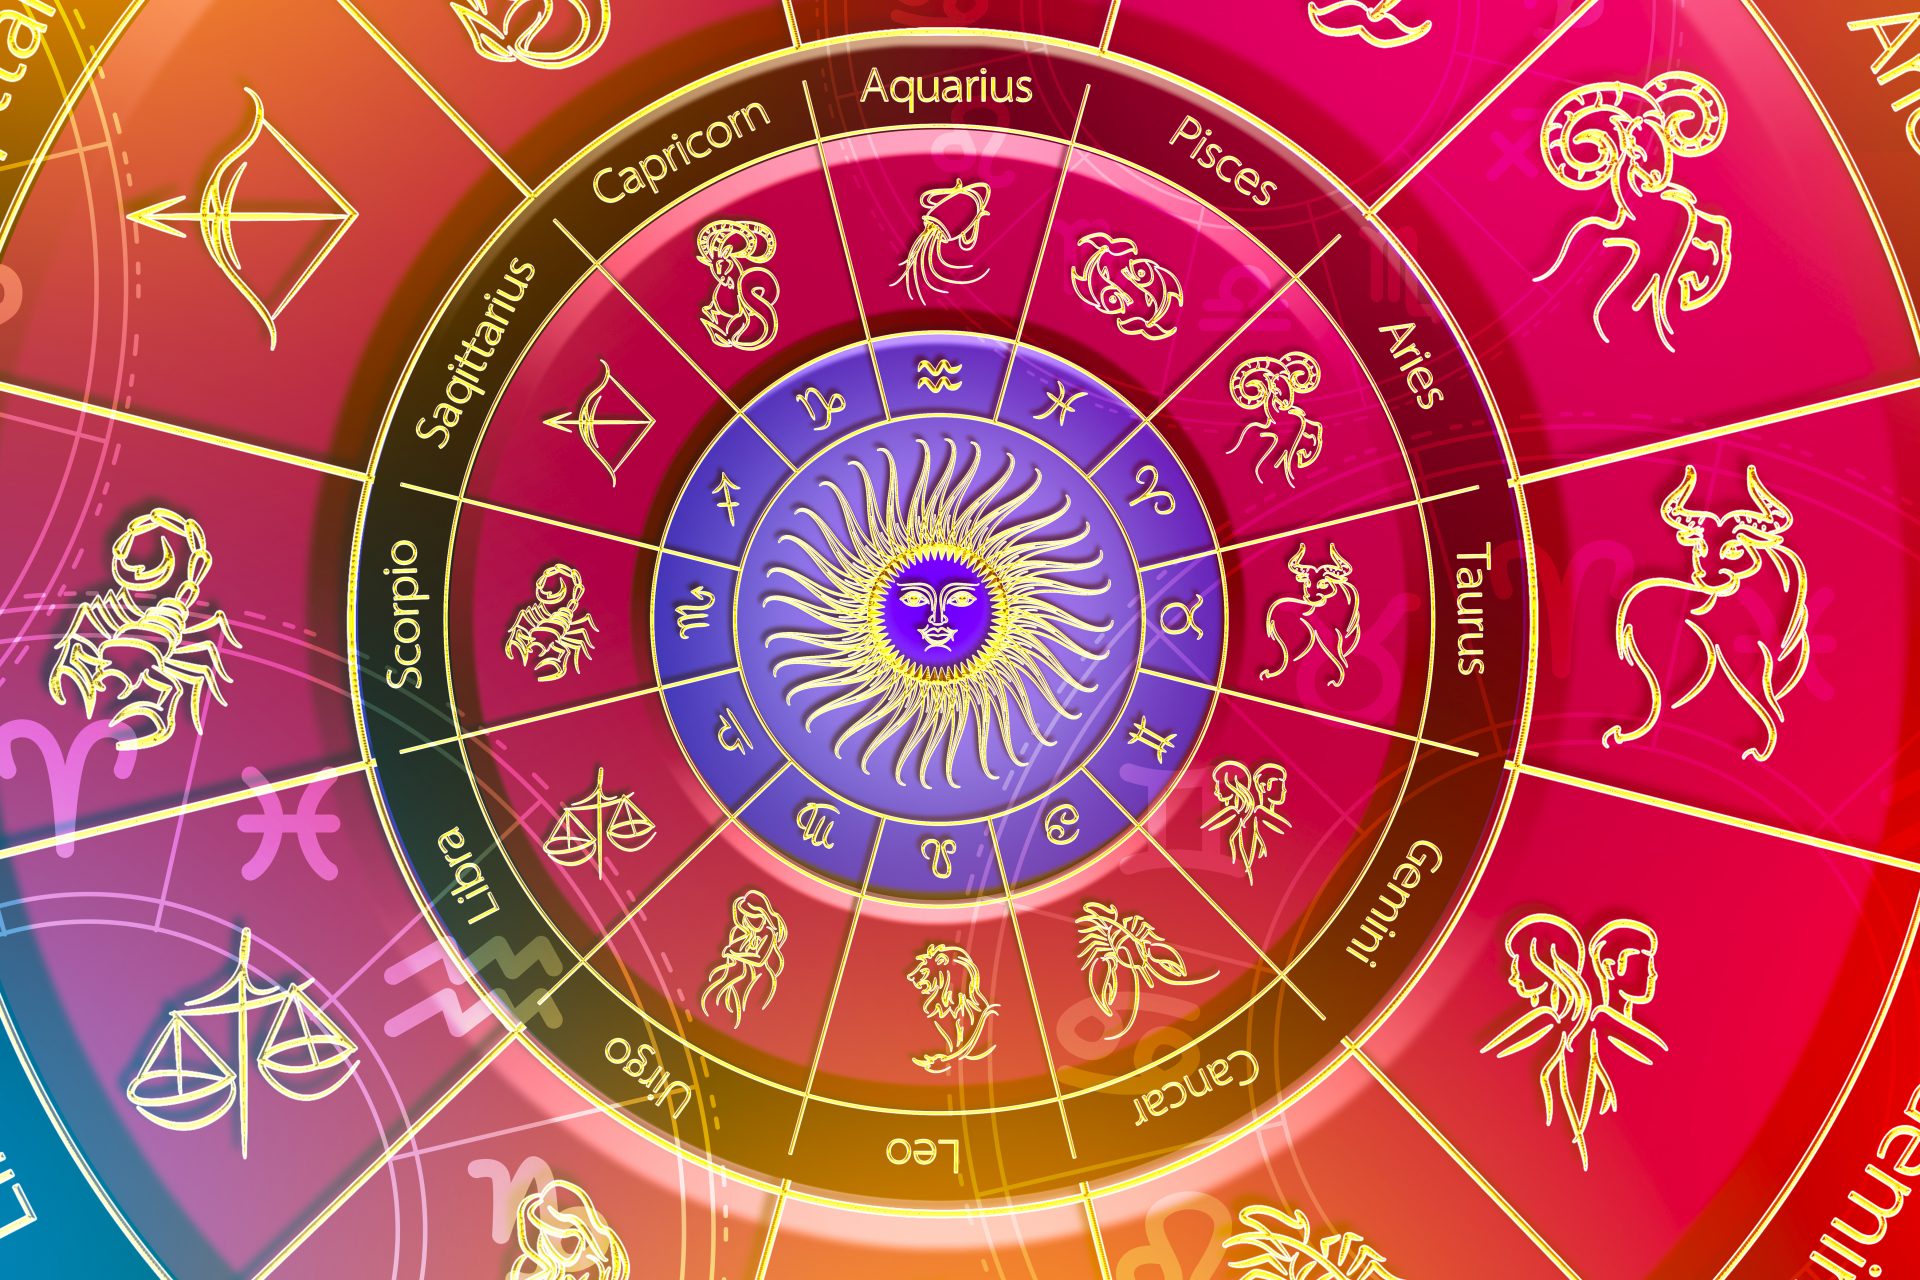 Horoscopes suggest 2024 could be good for love, romance